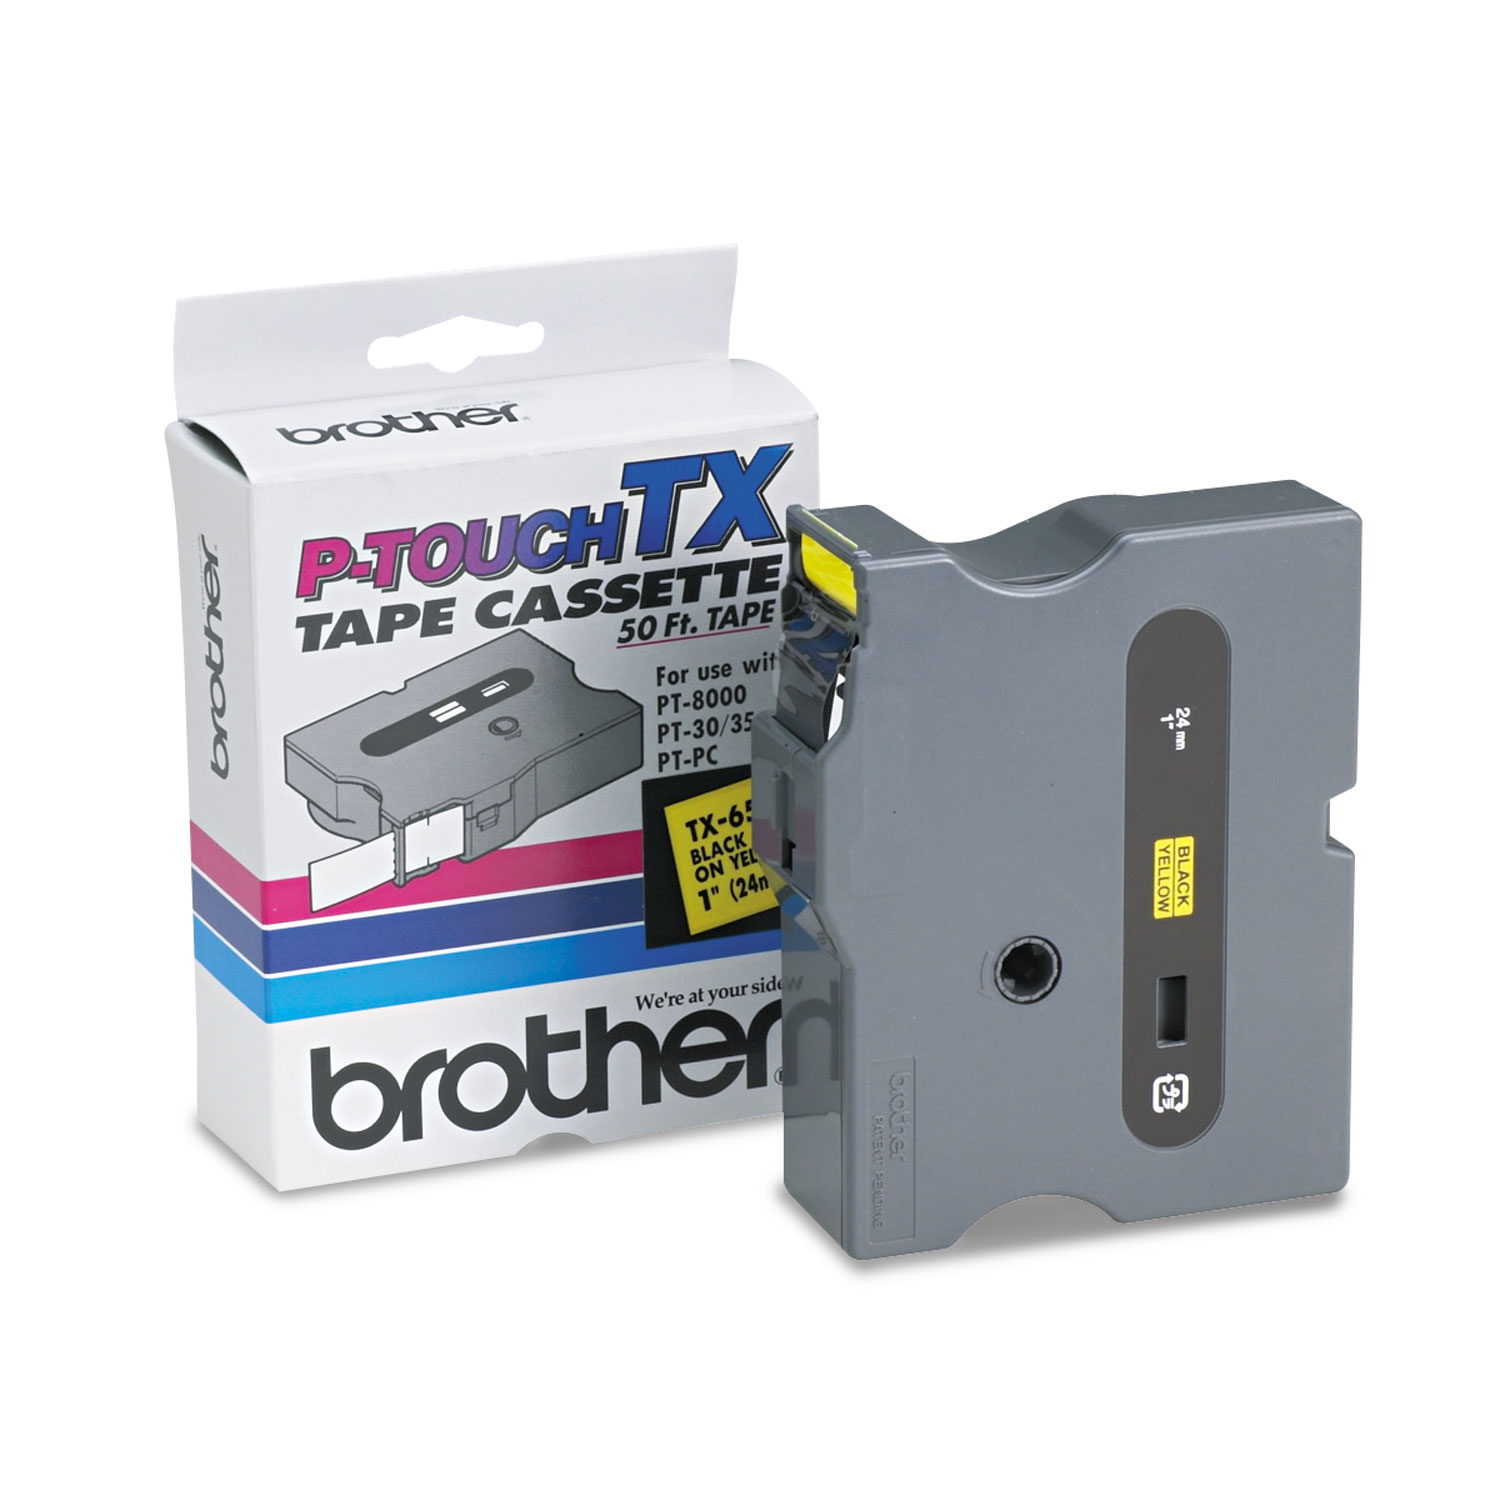  Brother P-Touch TX6511 TX Tape Cartridge for PT-8000, PT-PC, PT-30/35, 0.94 x 50 ft, Black on Yellow (BRTTX6511) 